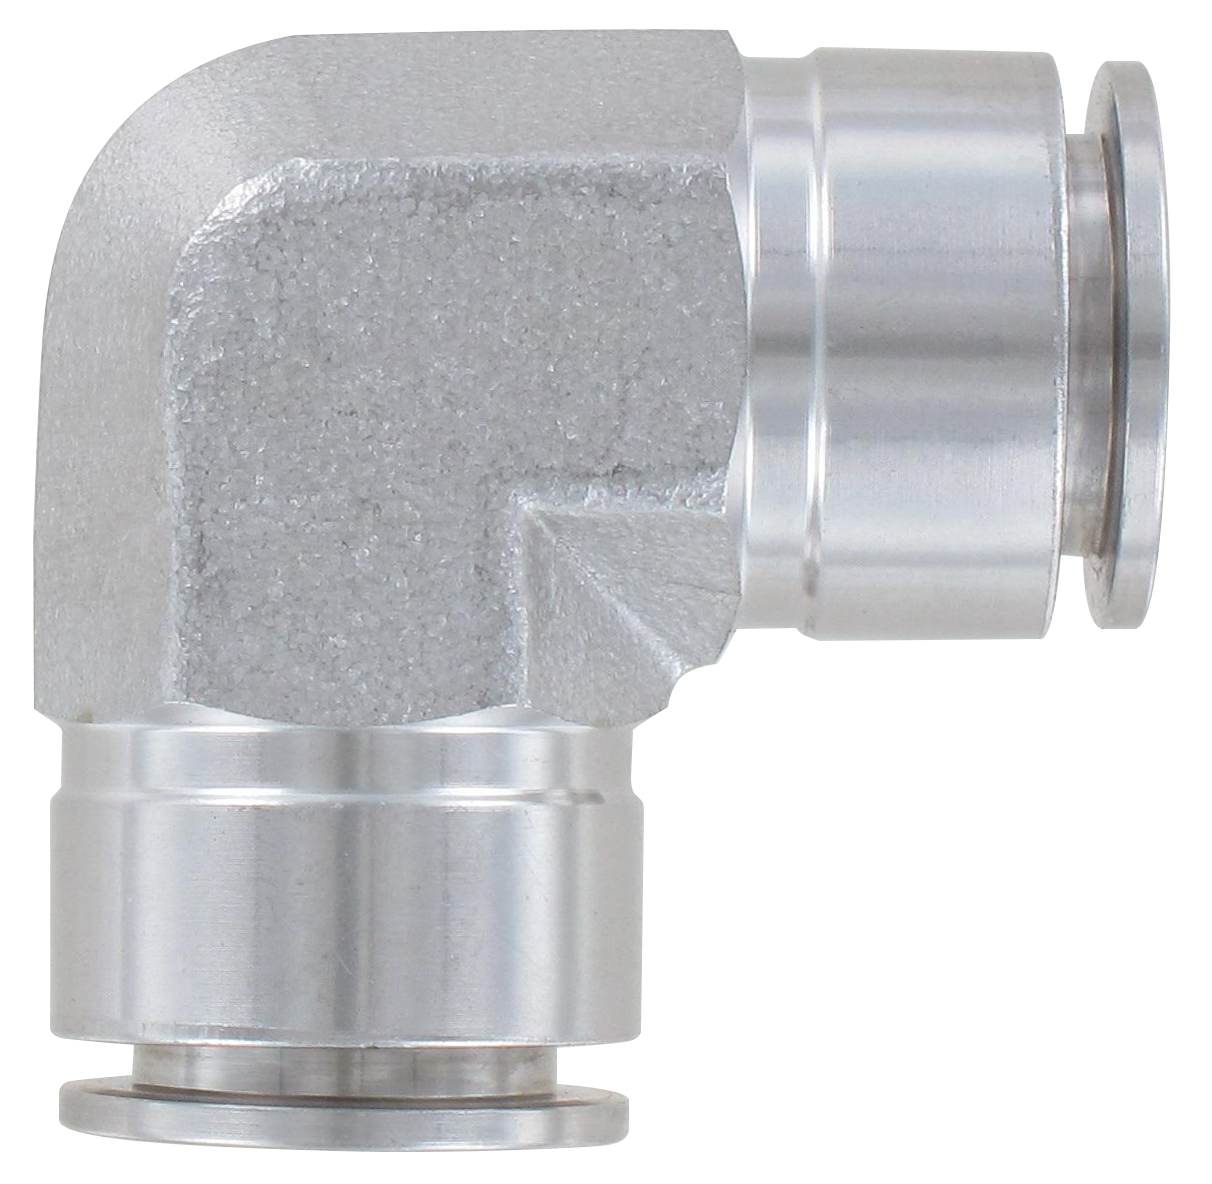 Equal angle fittings in 316 stainless steel Fittings and couplings